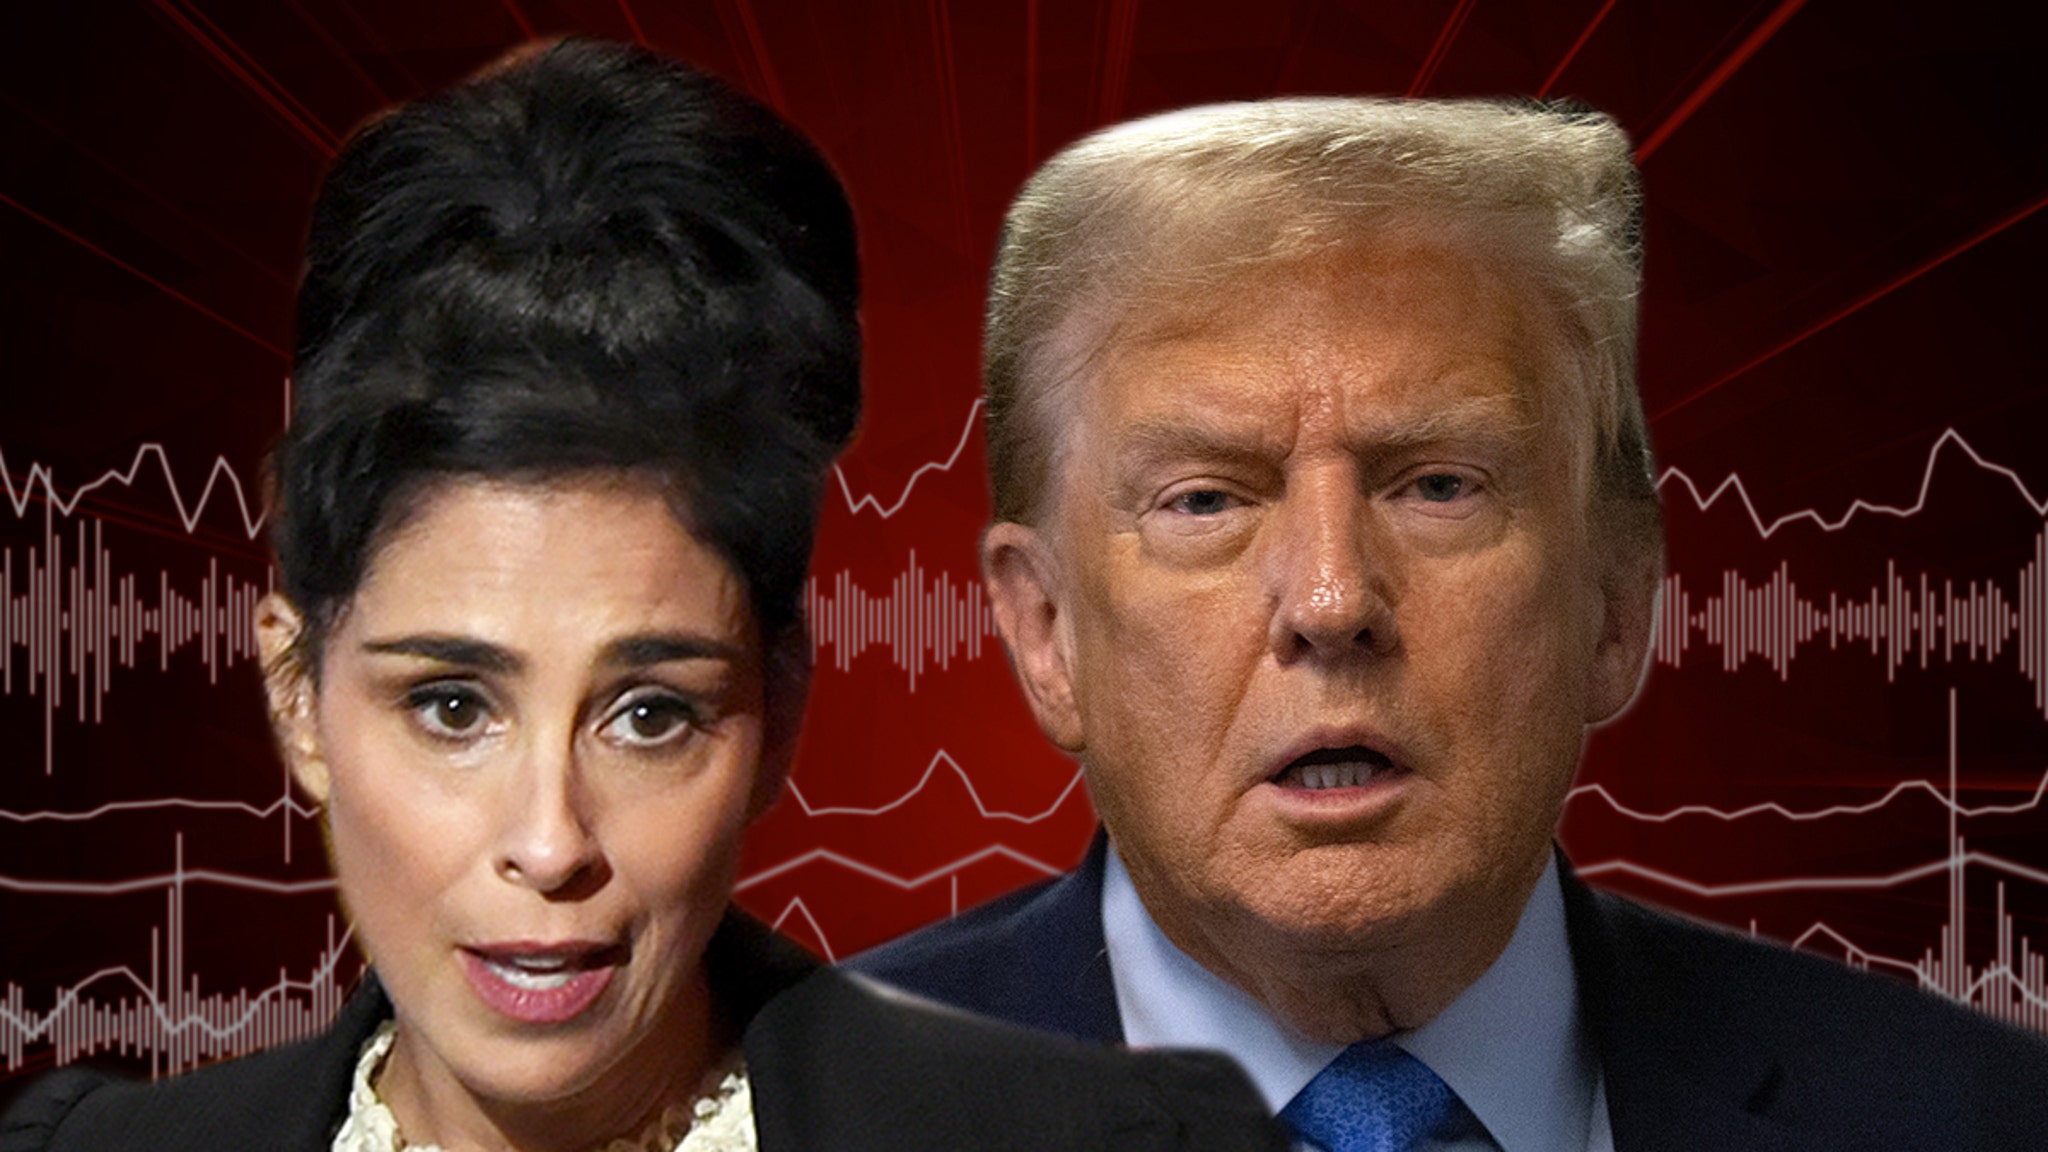 Sarah Silverman Says She Changed Her Comedy Style Over Trump